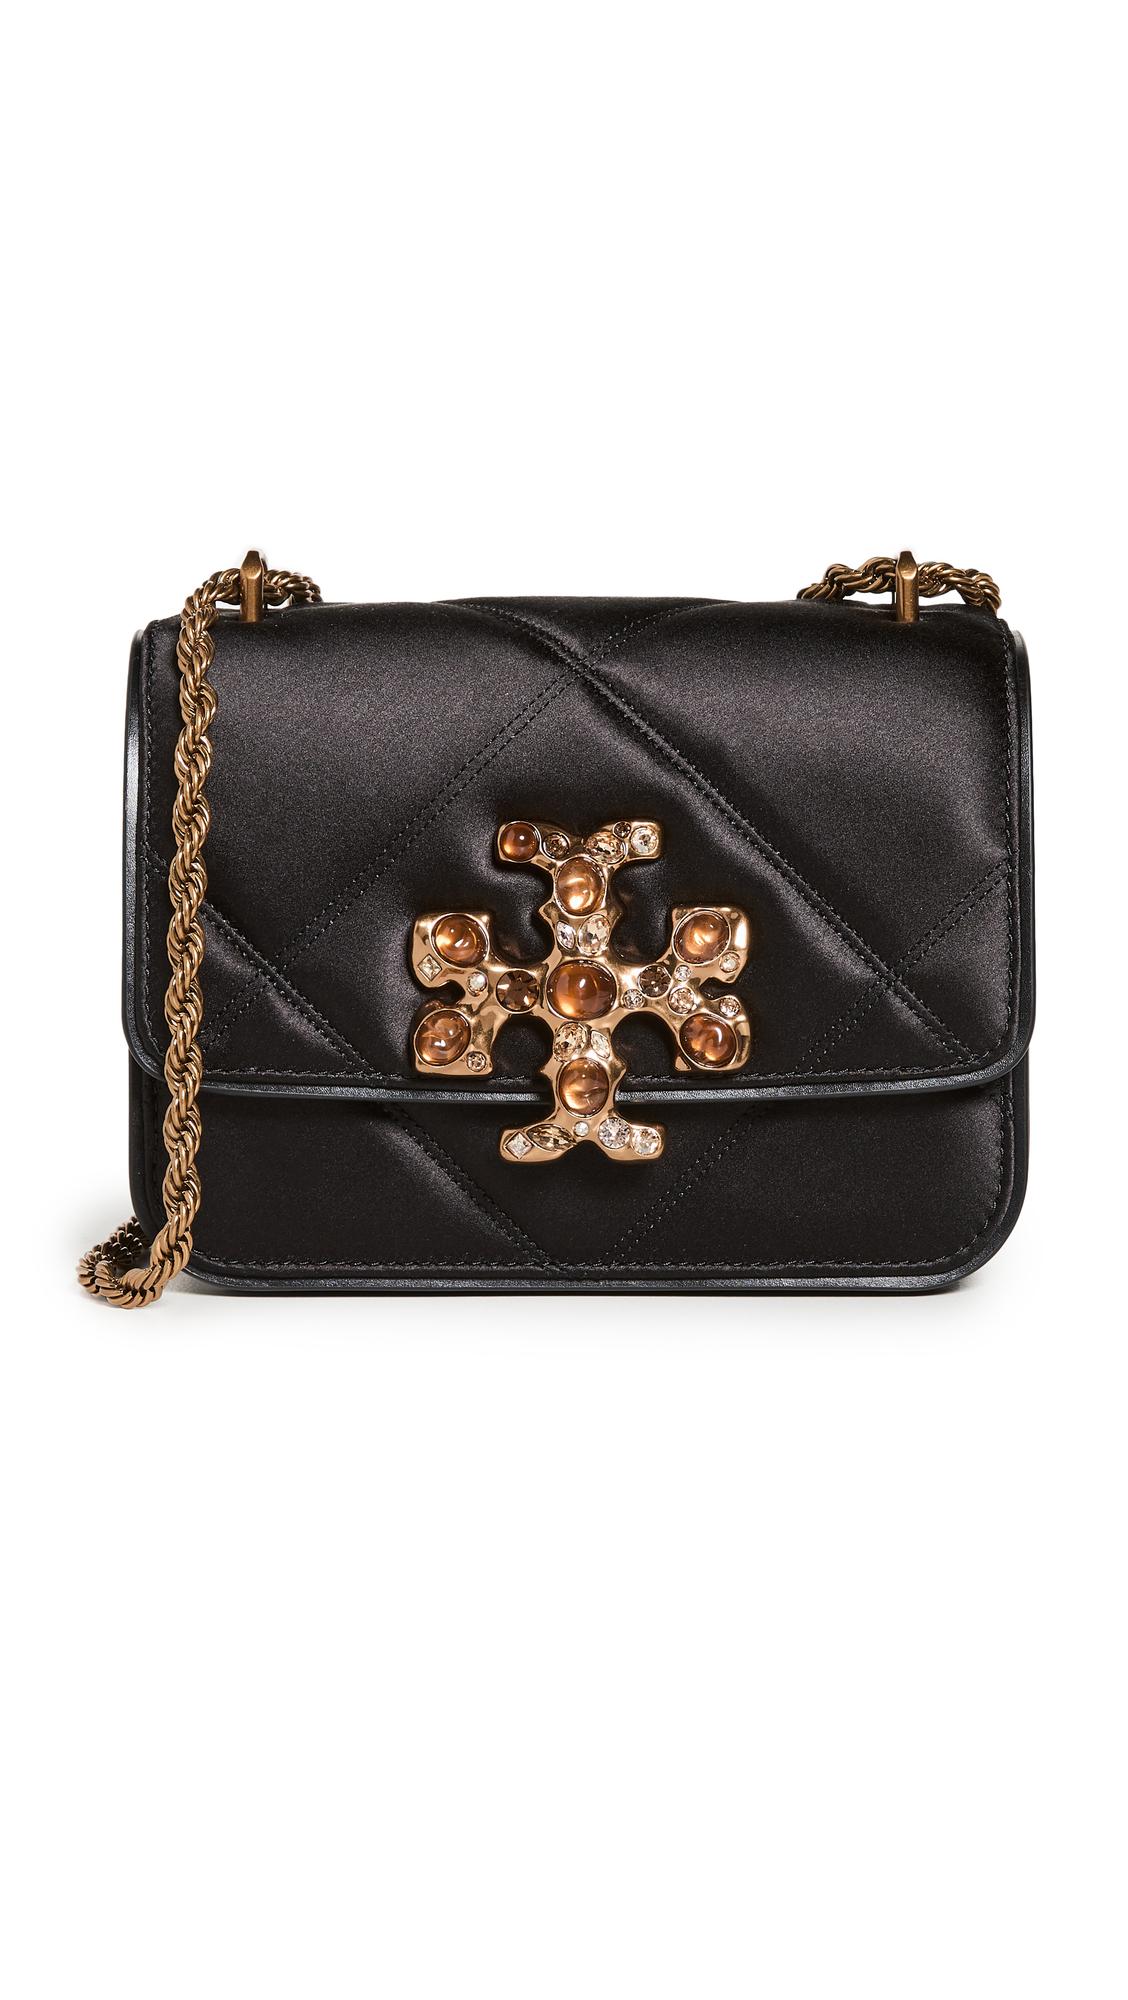 Tory Burch Eleanor Satin Small Convertible Shoulder Bag in Black | Lyst